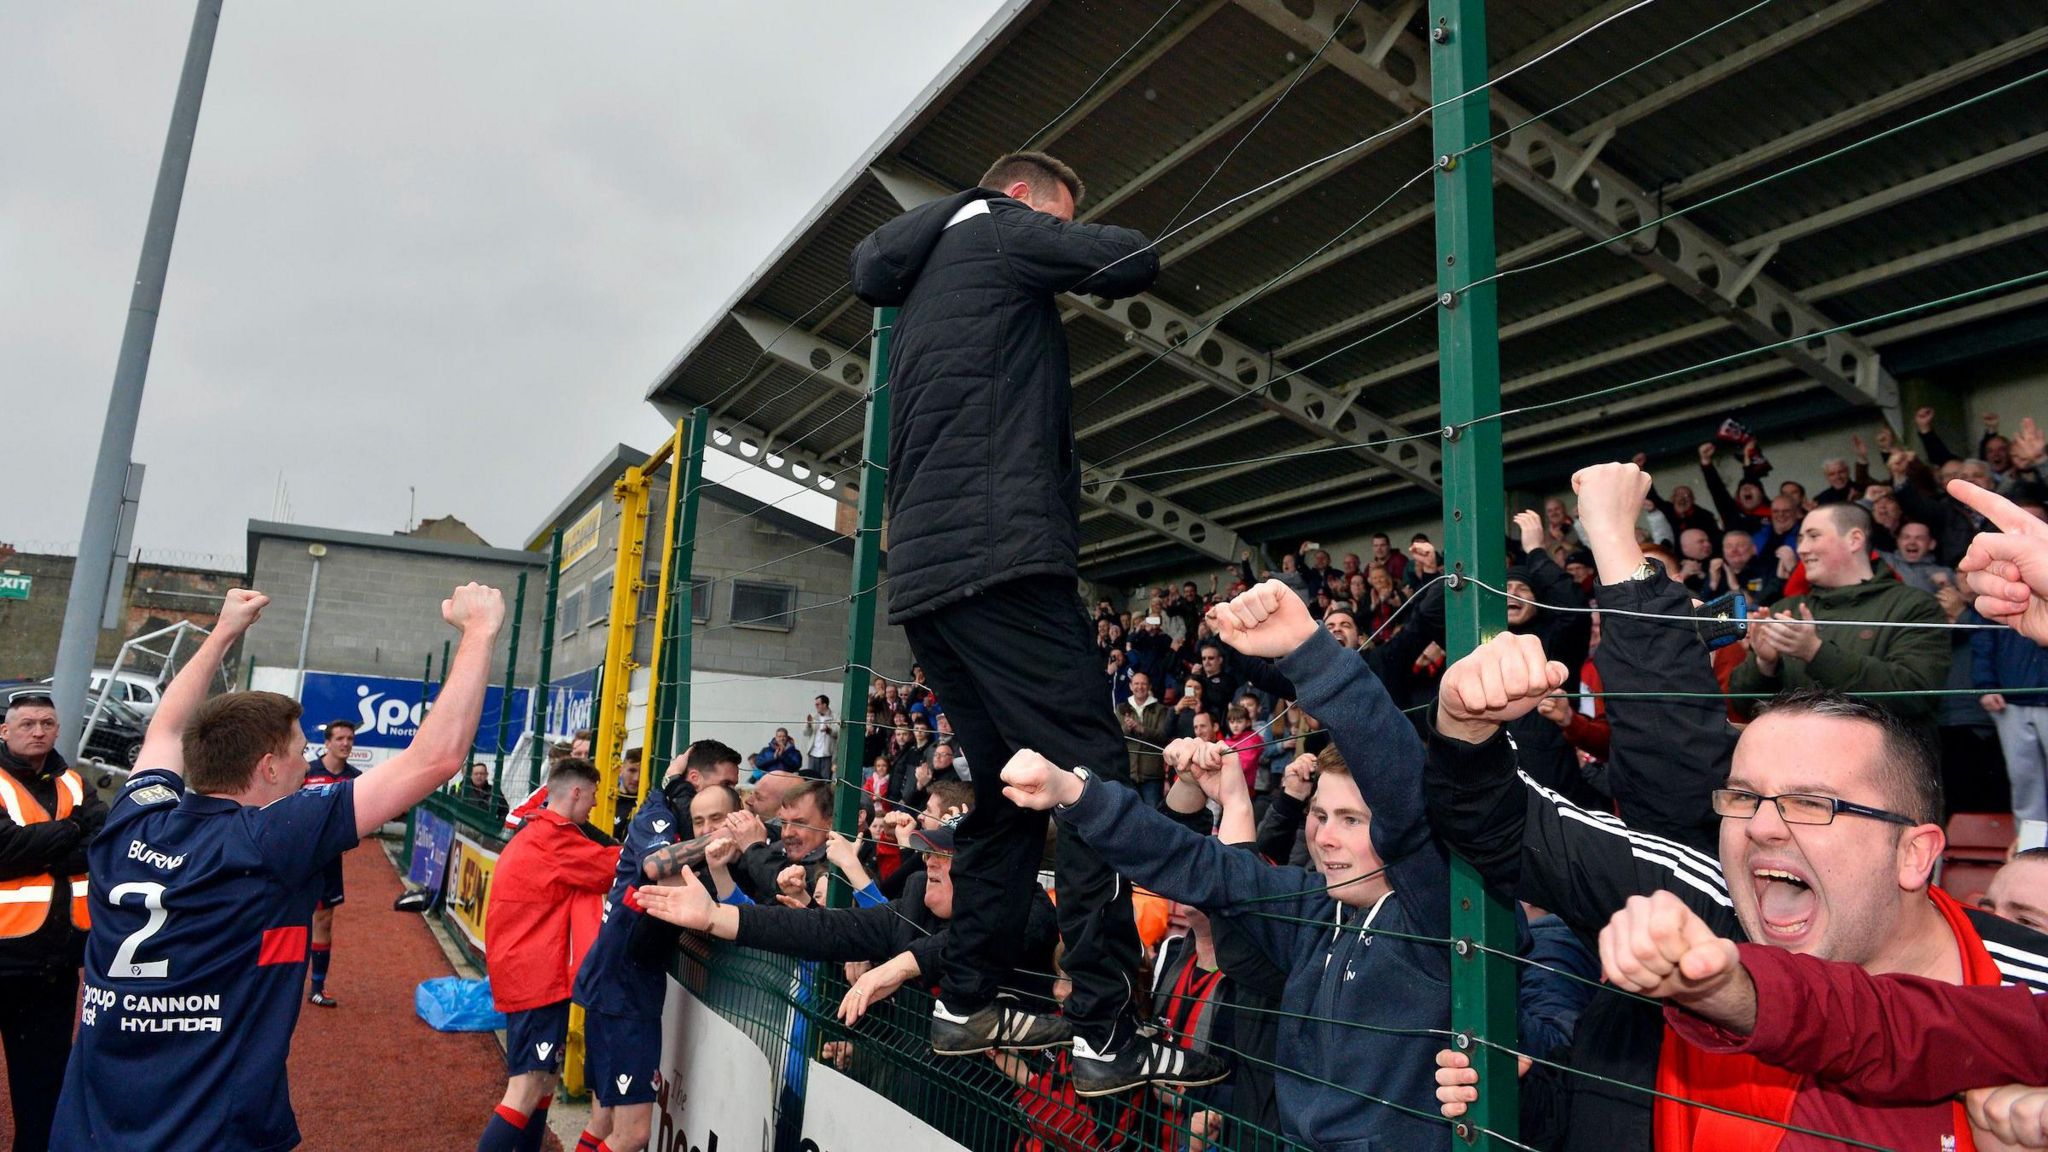 Stephen Baxter climbs the wire fence at Soltide after Crusaders clinched their first Irish Premiership title in 18 years